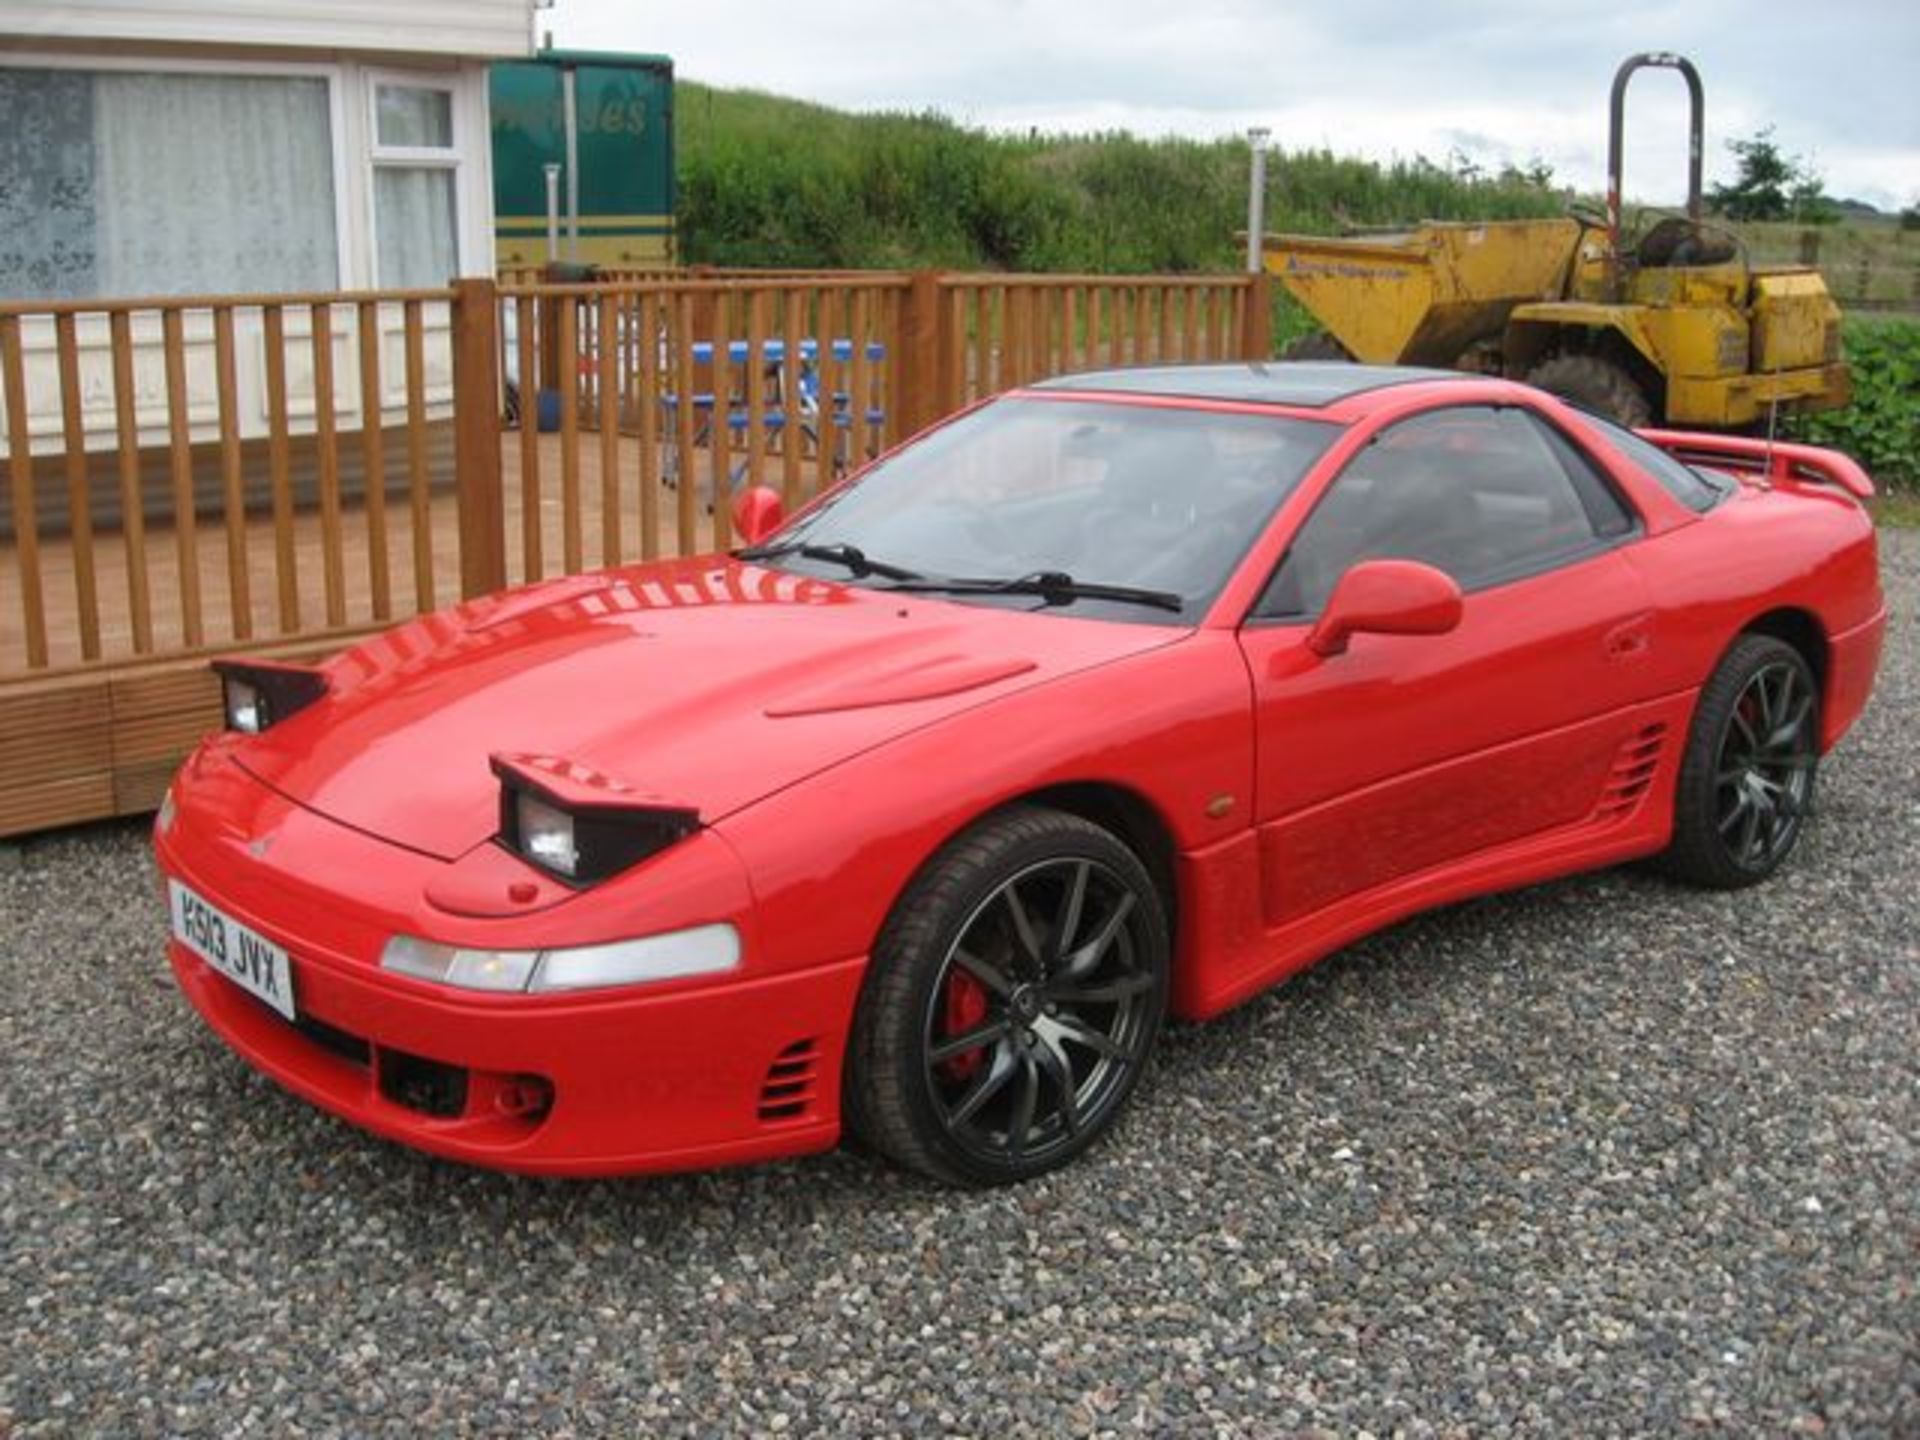 MITSUBISHI, 3000 GT V6 TURBO - 2972cc, Chassis number JMAMNZ16APY000228 - presented with an - Image 8 of 17